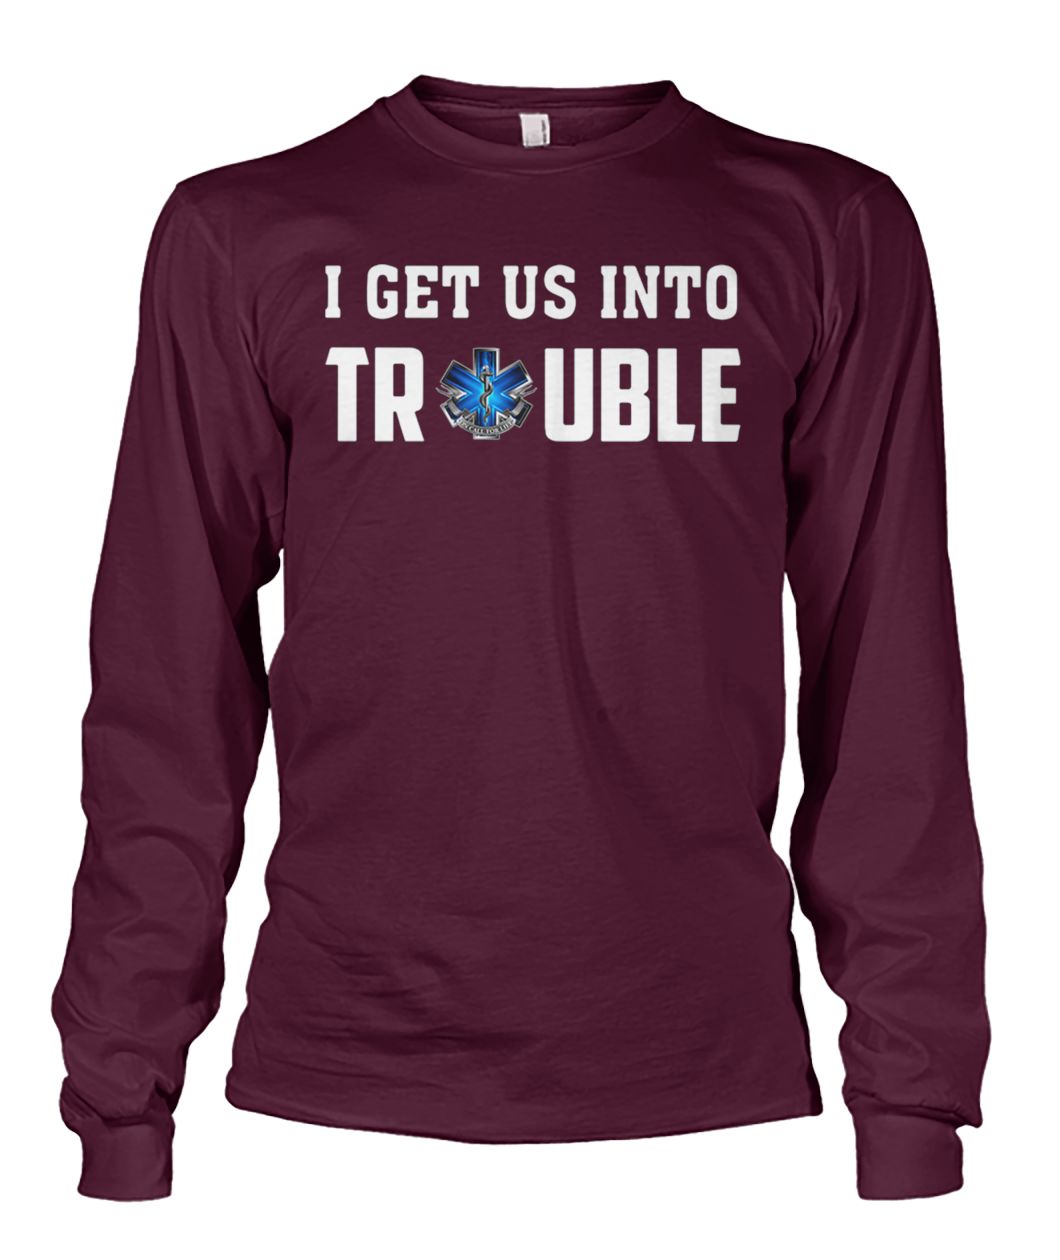 I get us into trouble on call for life blue snake unisex long sleeve